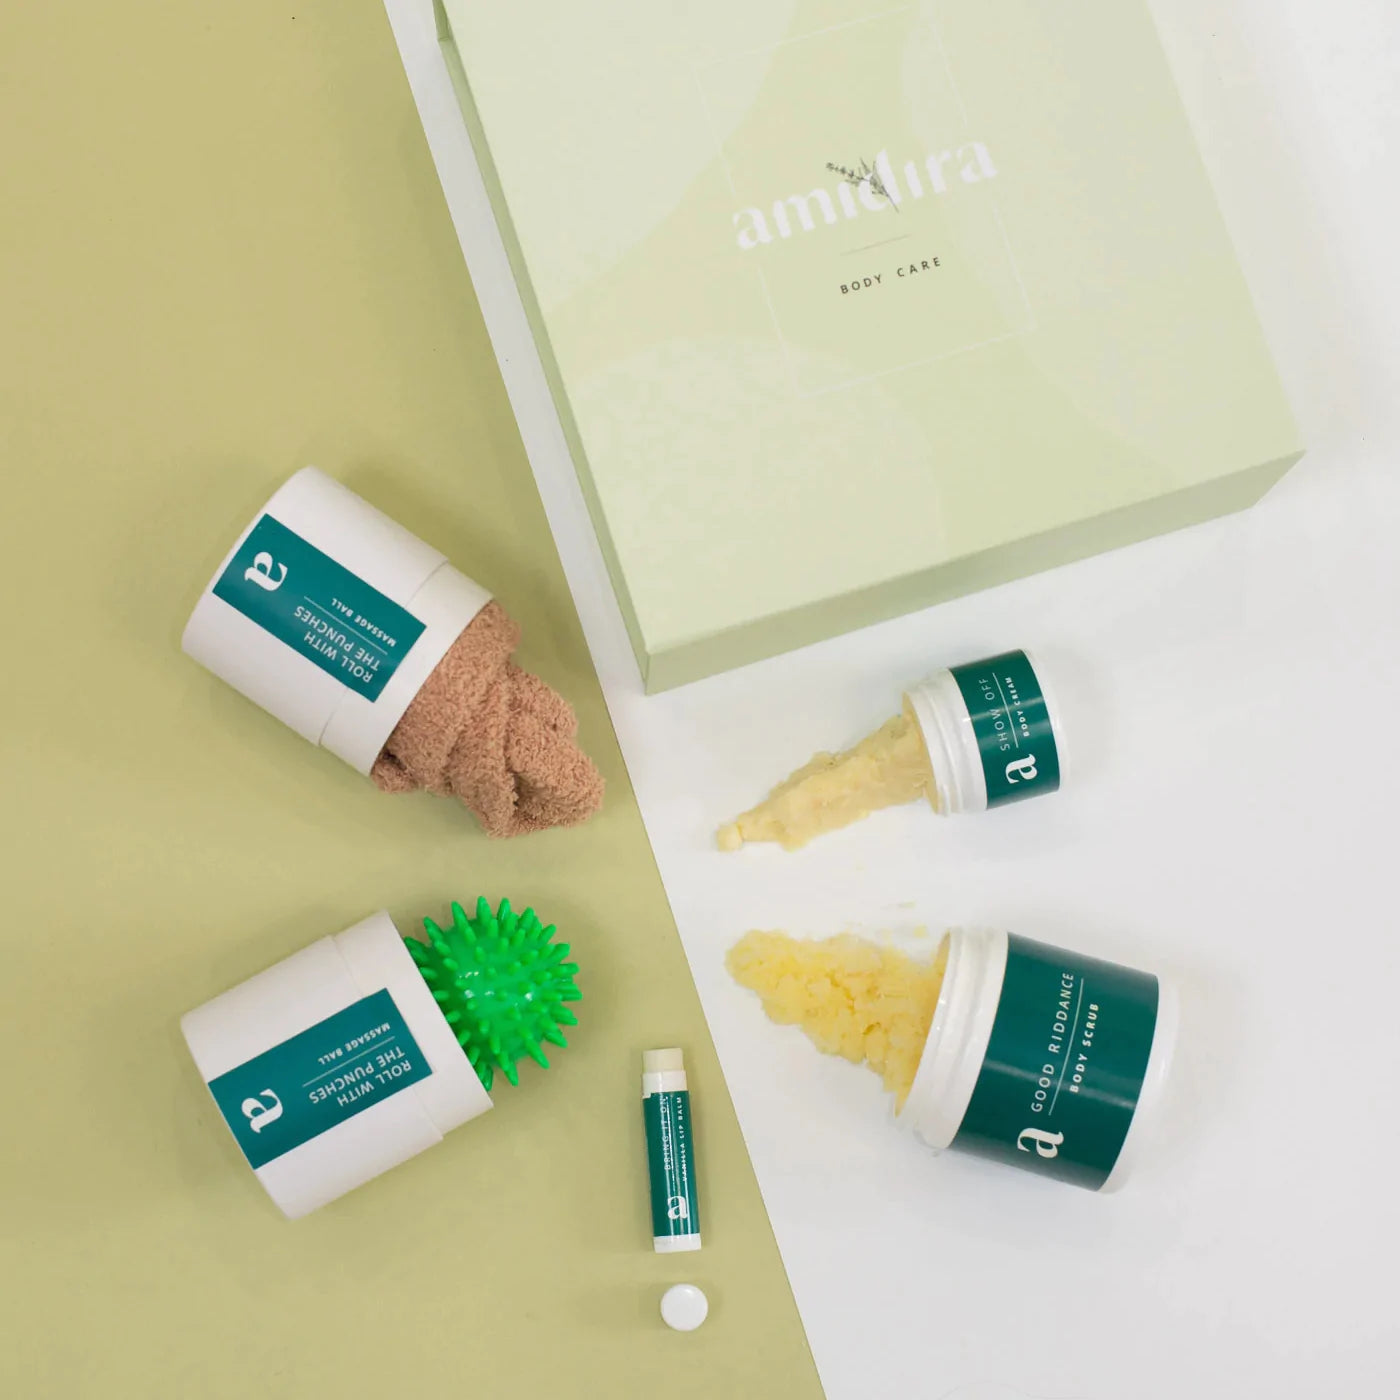 An array of self-care products from a gift box by Amidira